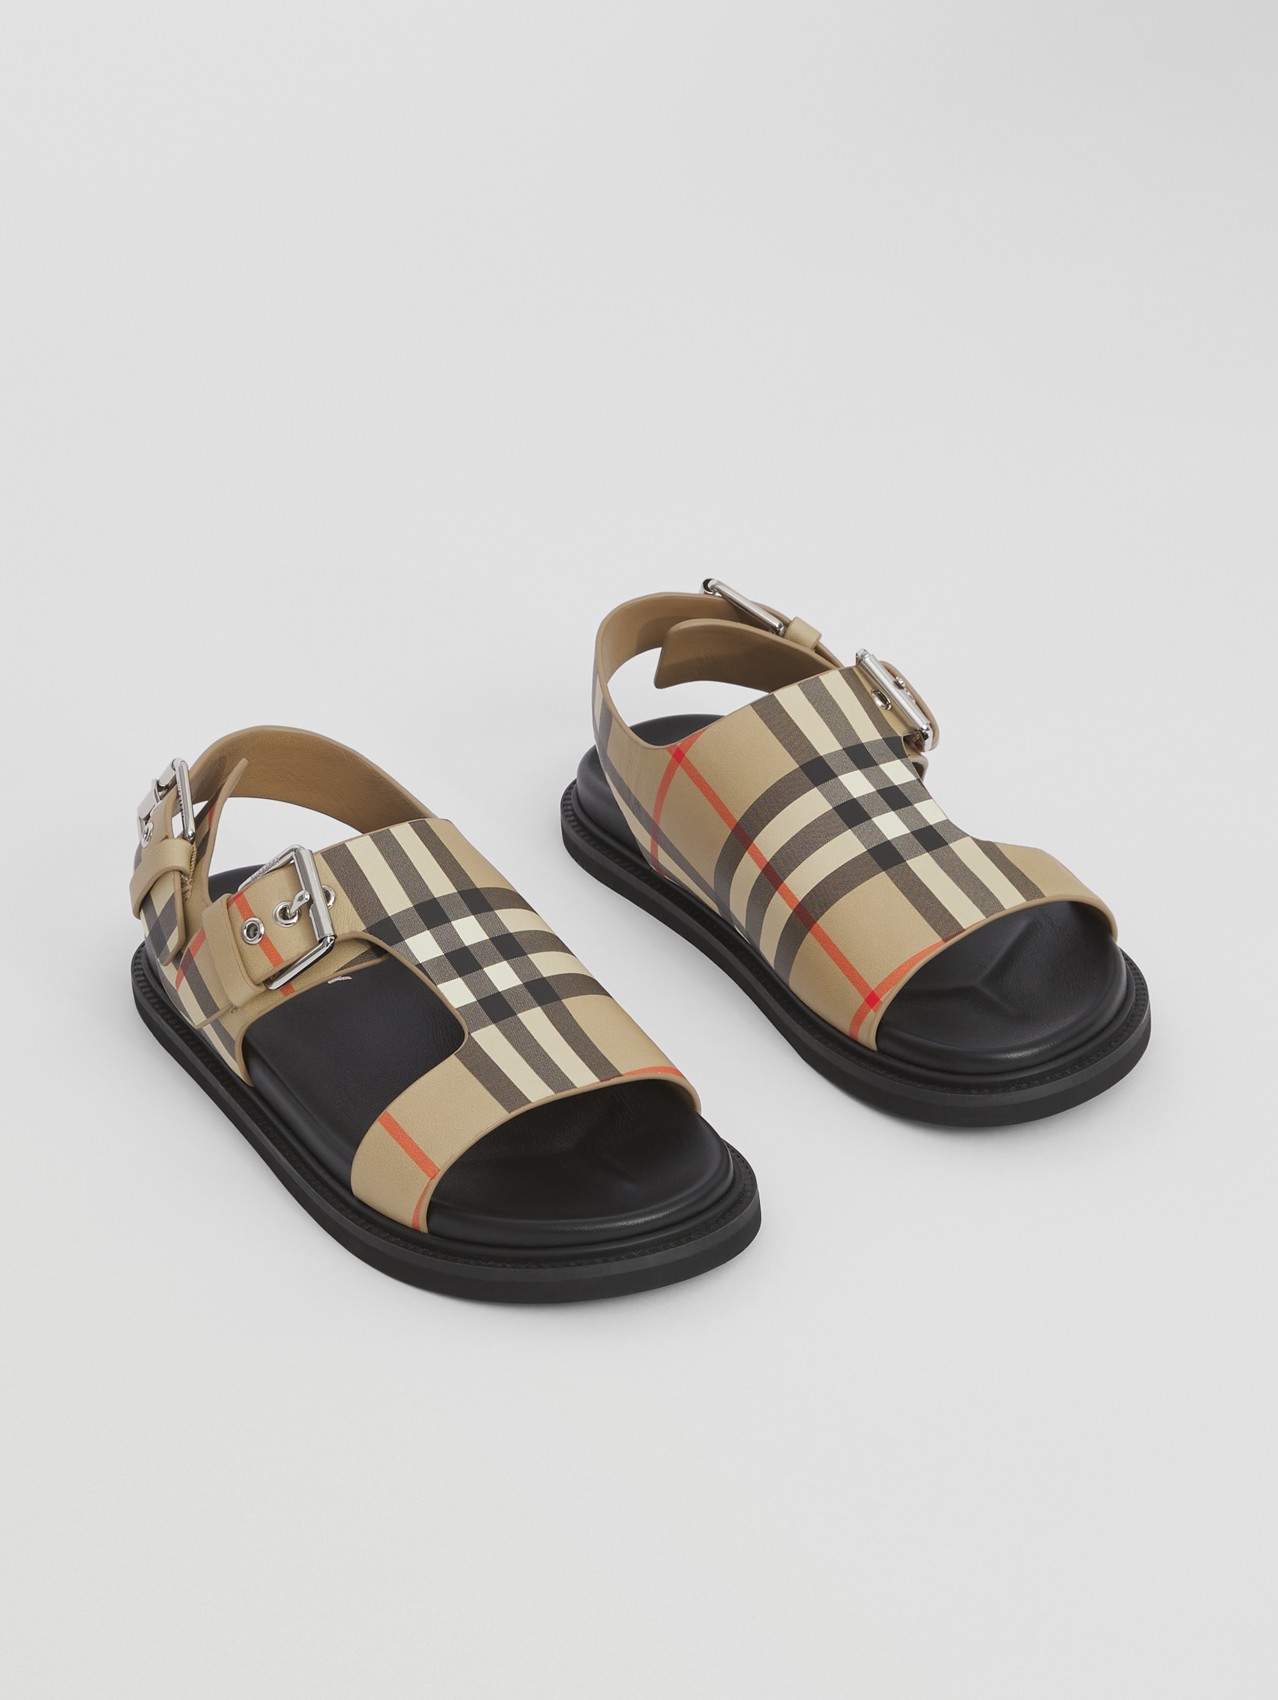 Vintage Check Leather Buckled Sandals in Archive Beige